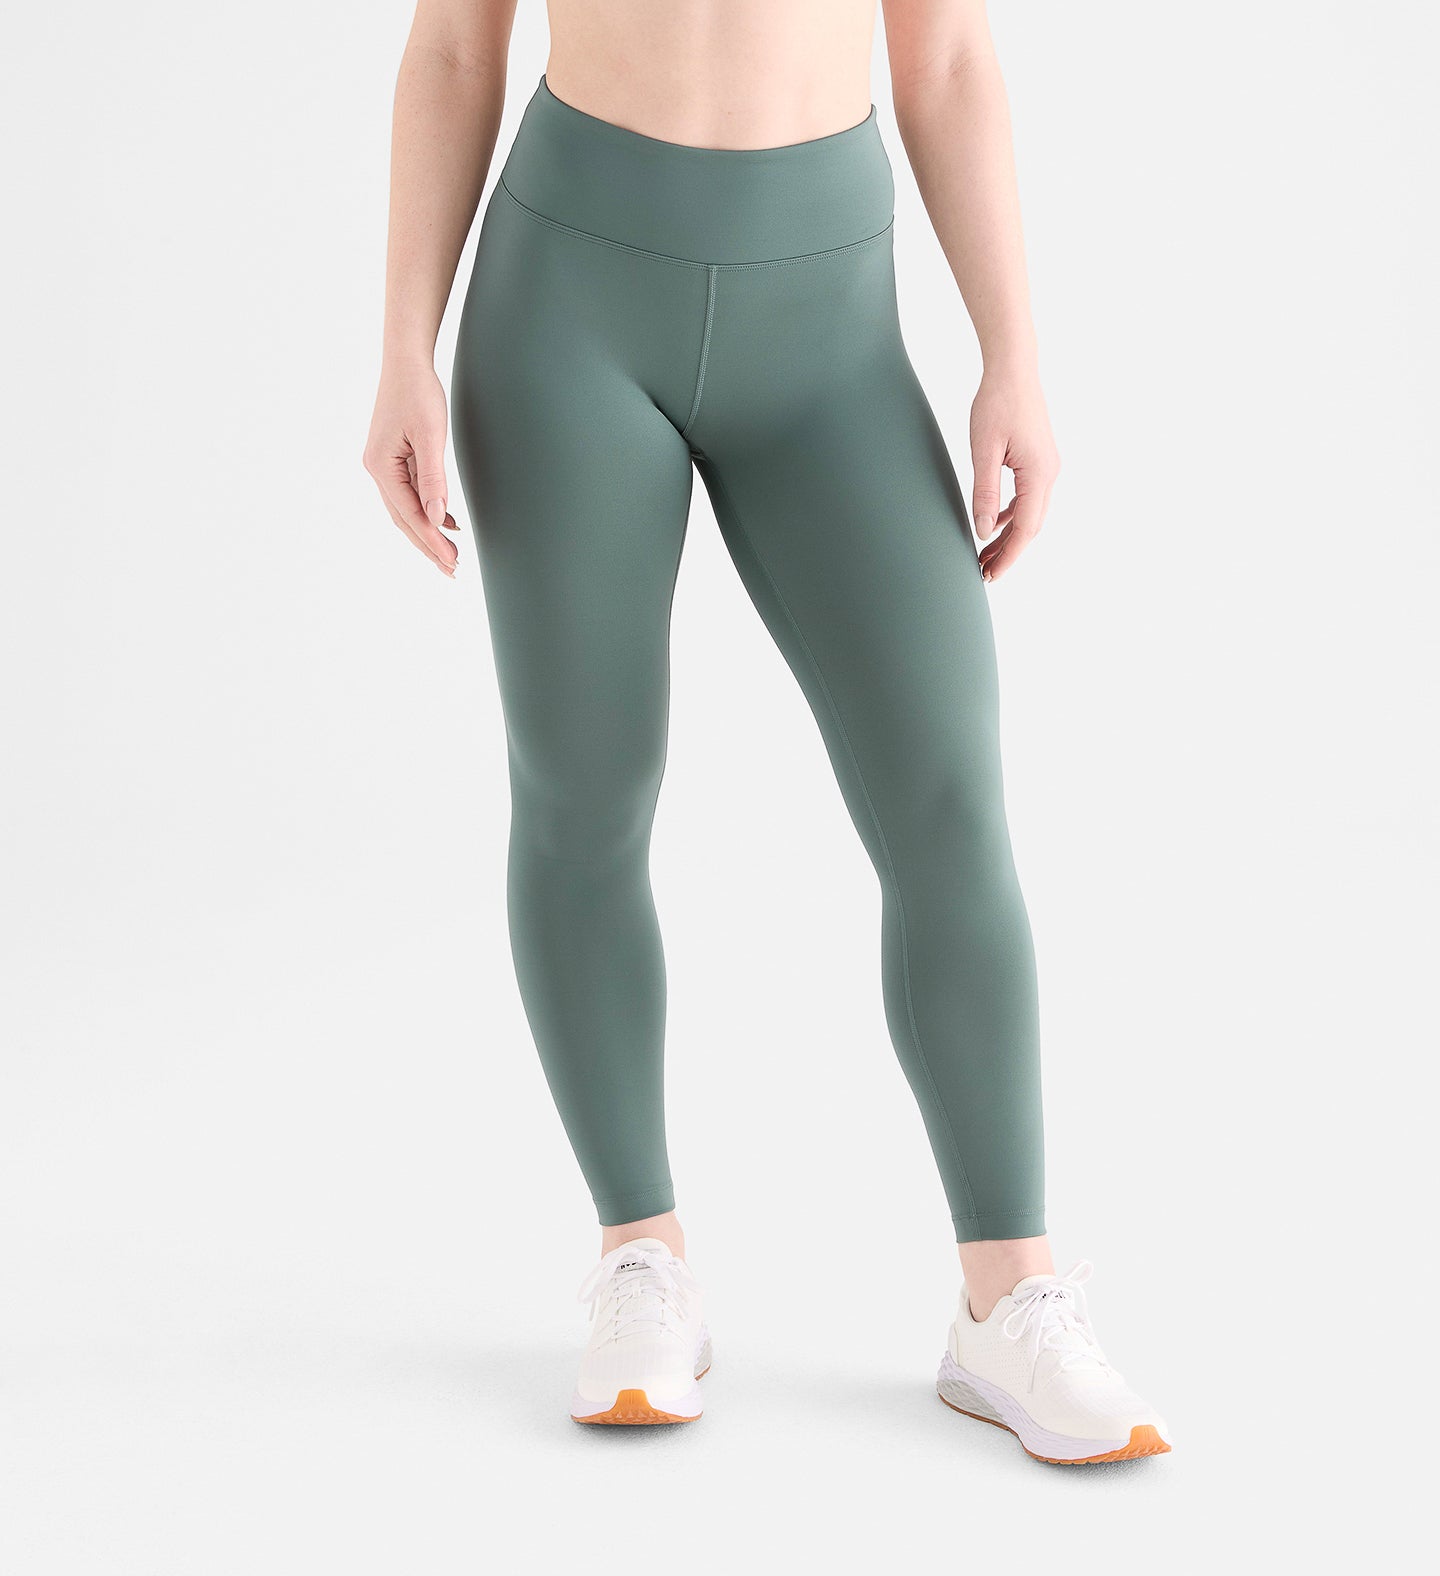 Lululemon Align High-Rise Pant with Pockets 28 - Tidewater Teal